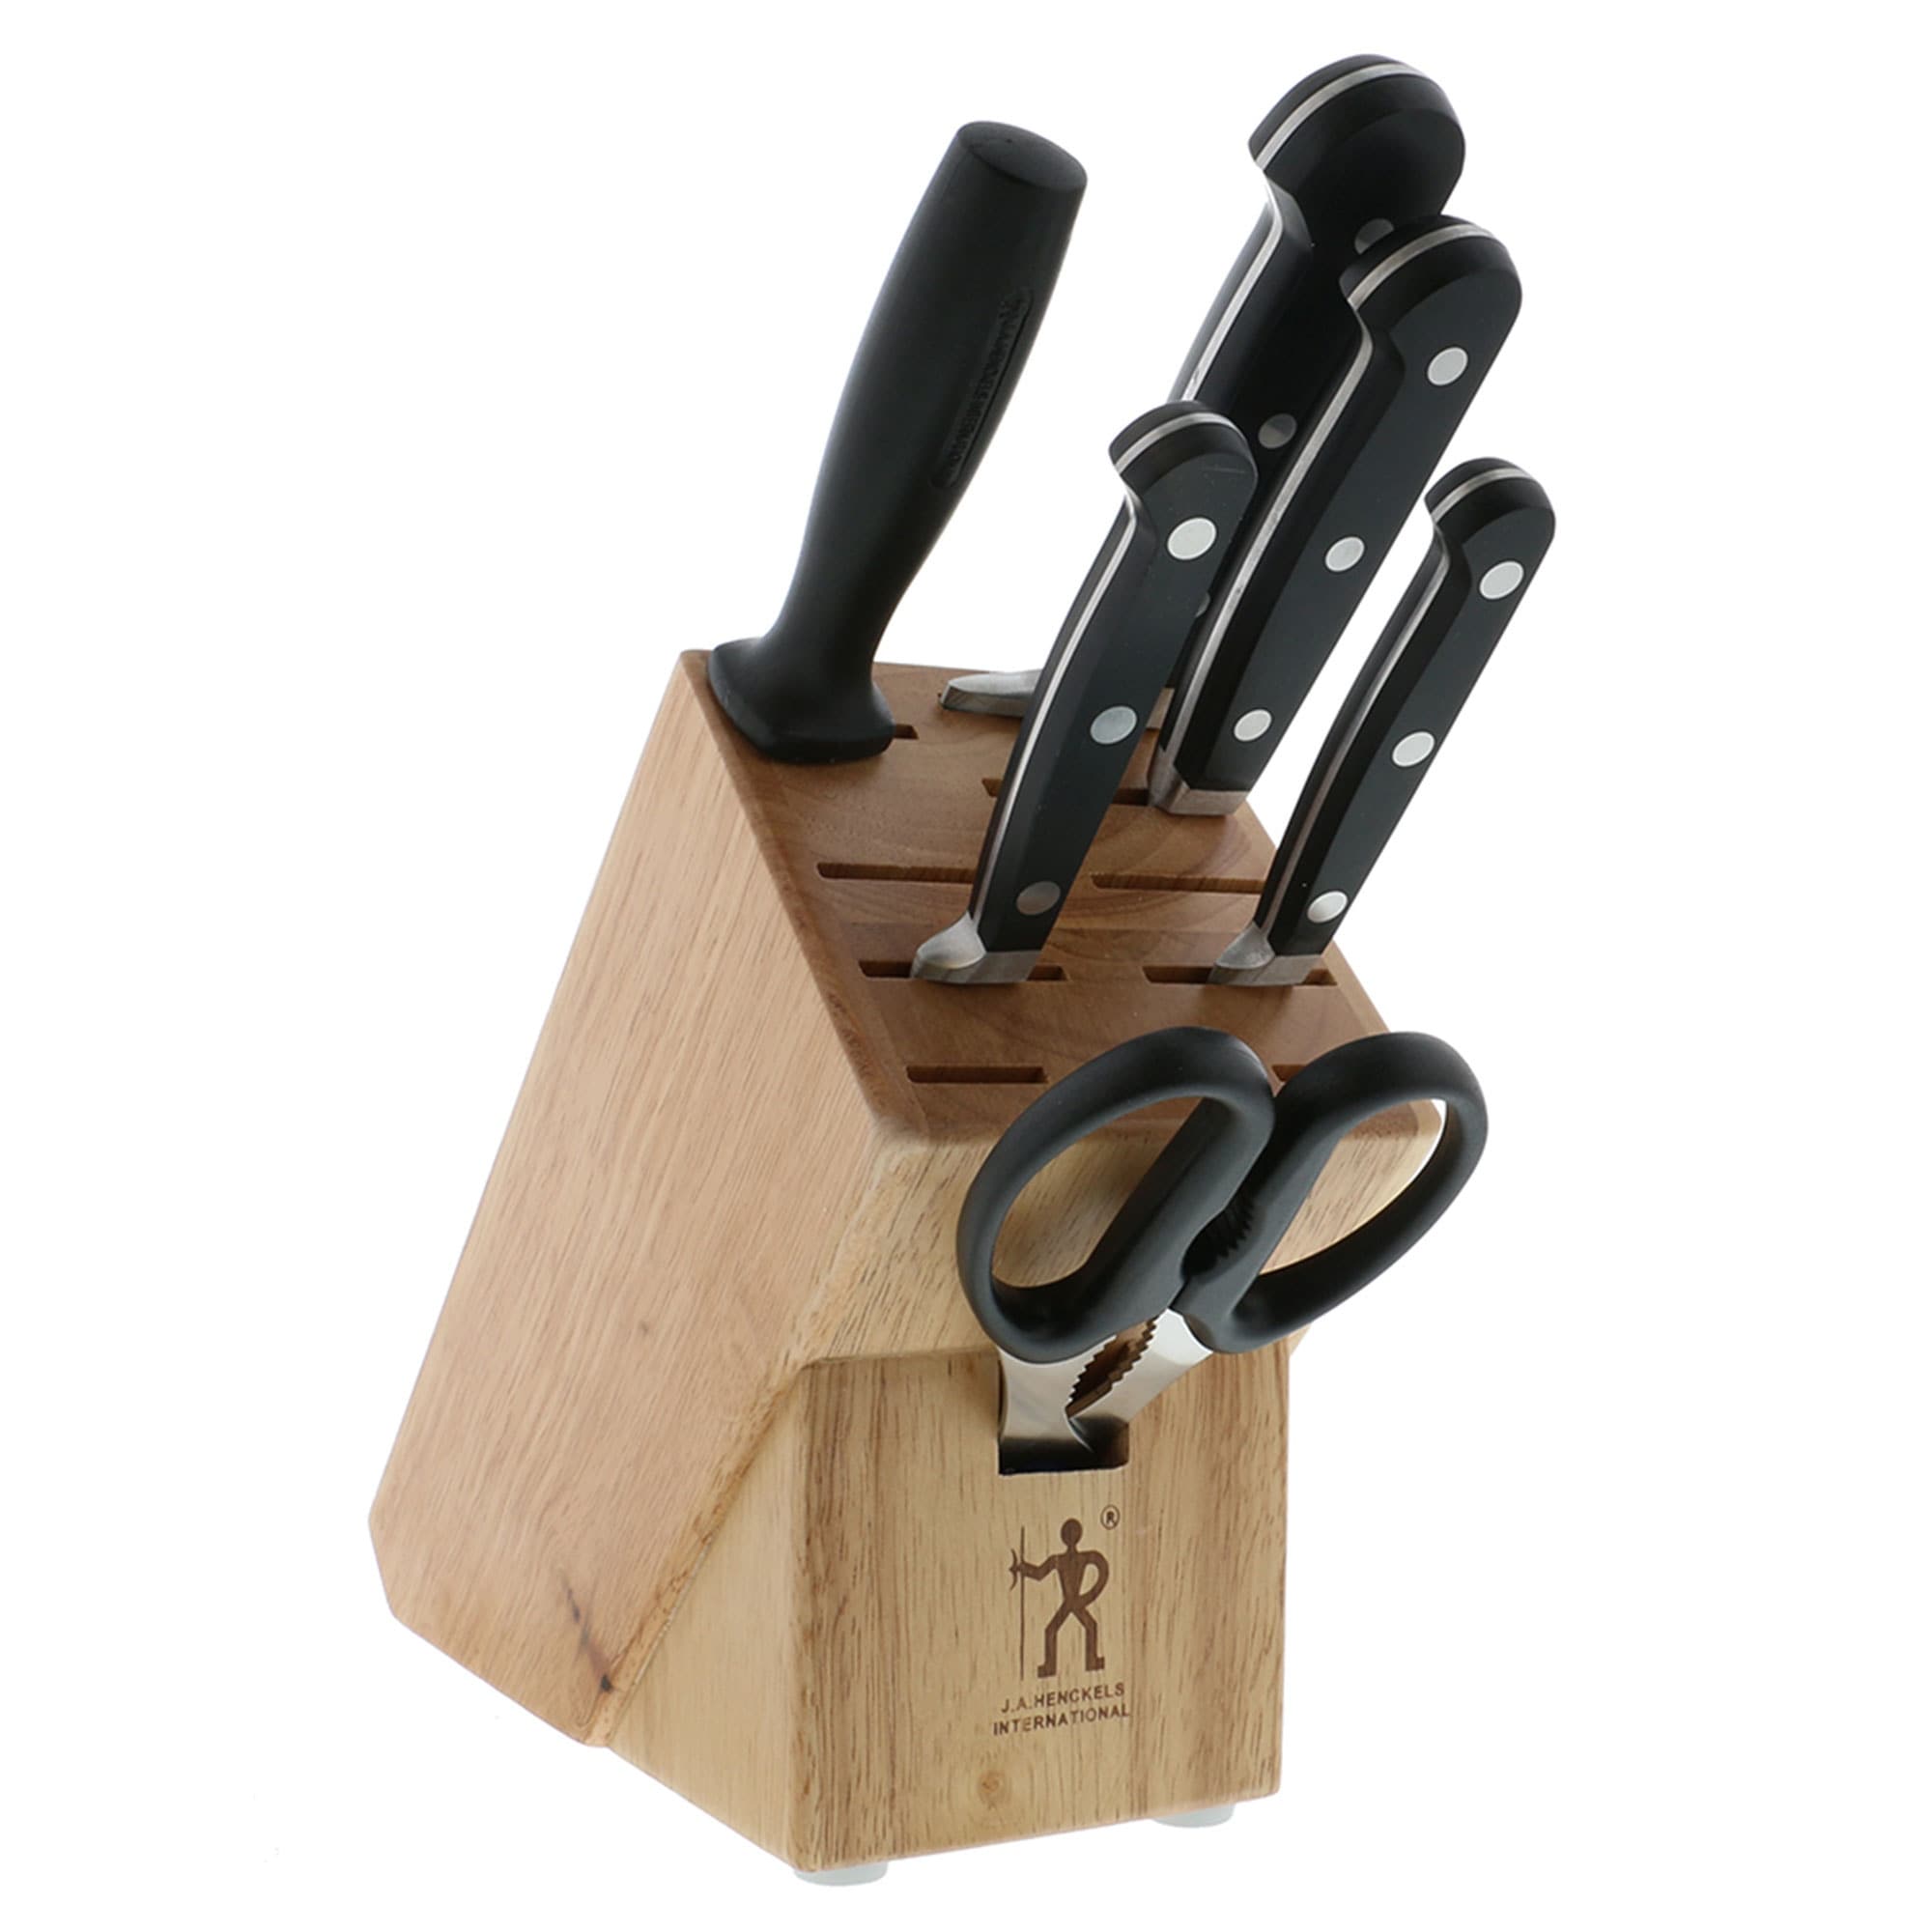 https://ak1.ostkcdn.com/images/products/is/images/direct/9bf1aa2c3379389d508c598fb8c7efb77a5ff2a8/Henckels-CLASSIC-7-pc-Knife-Block-Set.jpg